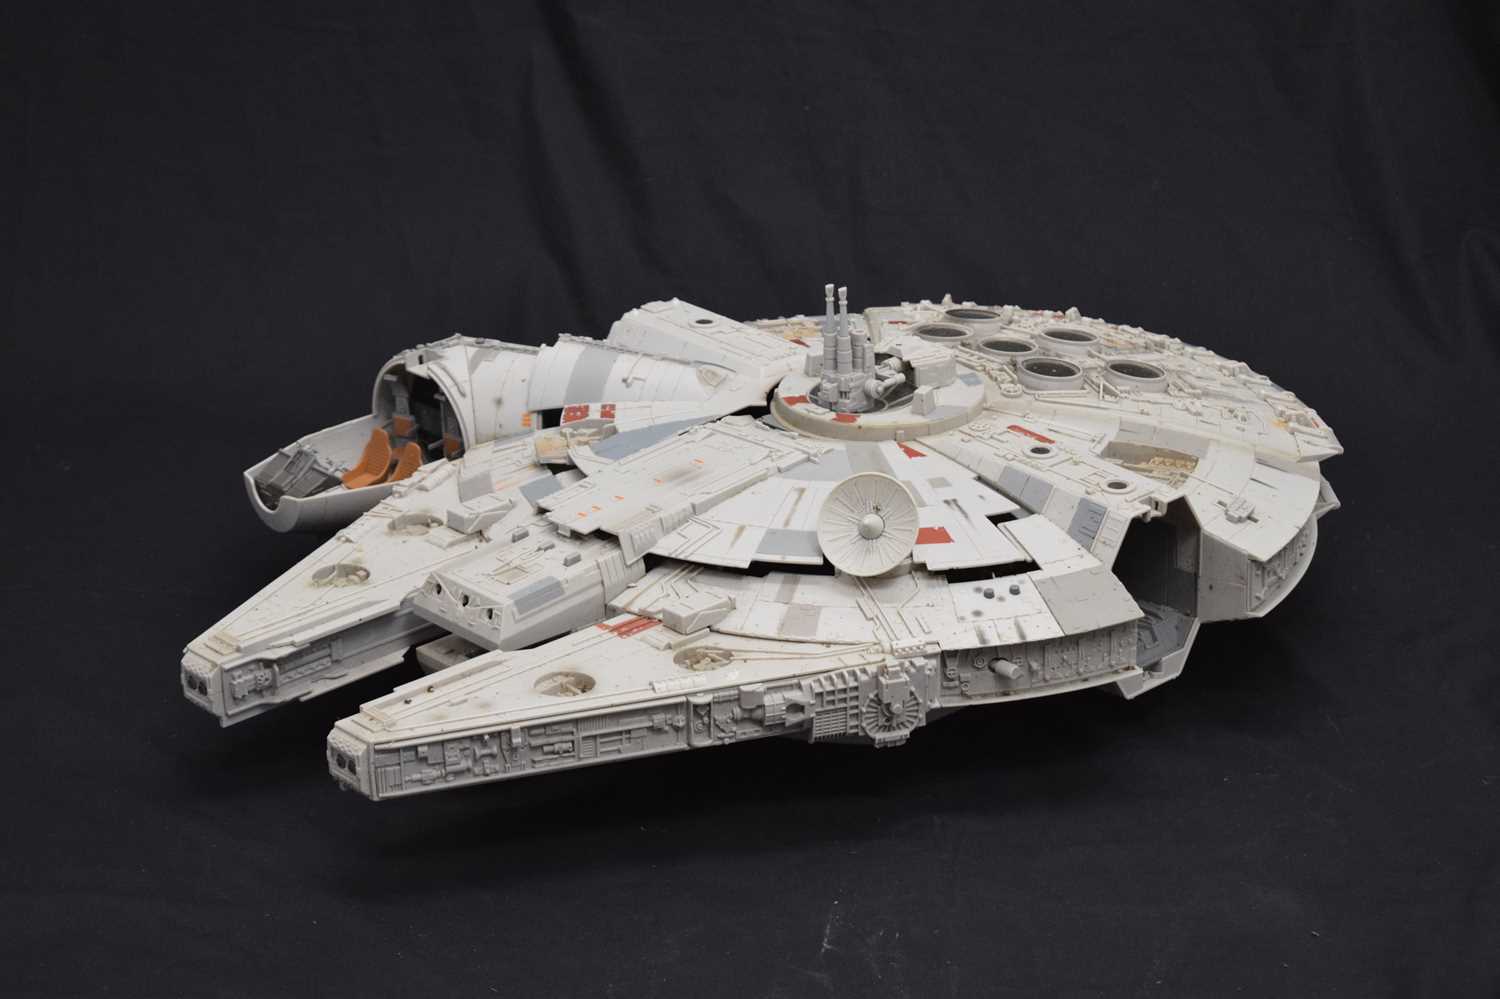 Star Wars - Large 'Millennium Falcon' playset and a large quantity of action figures - Image 8 of 8